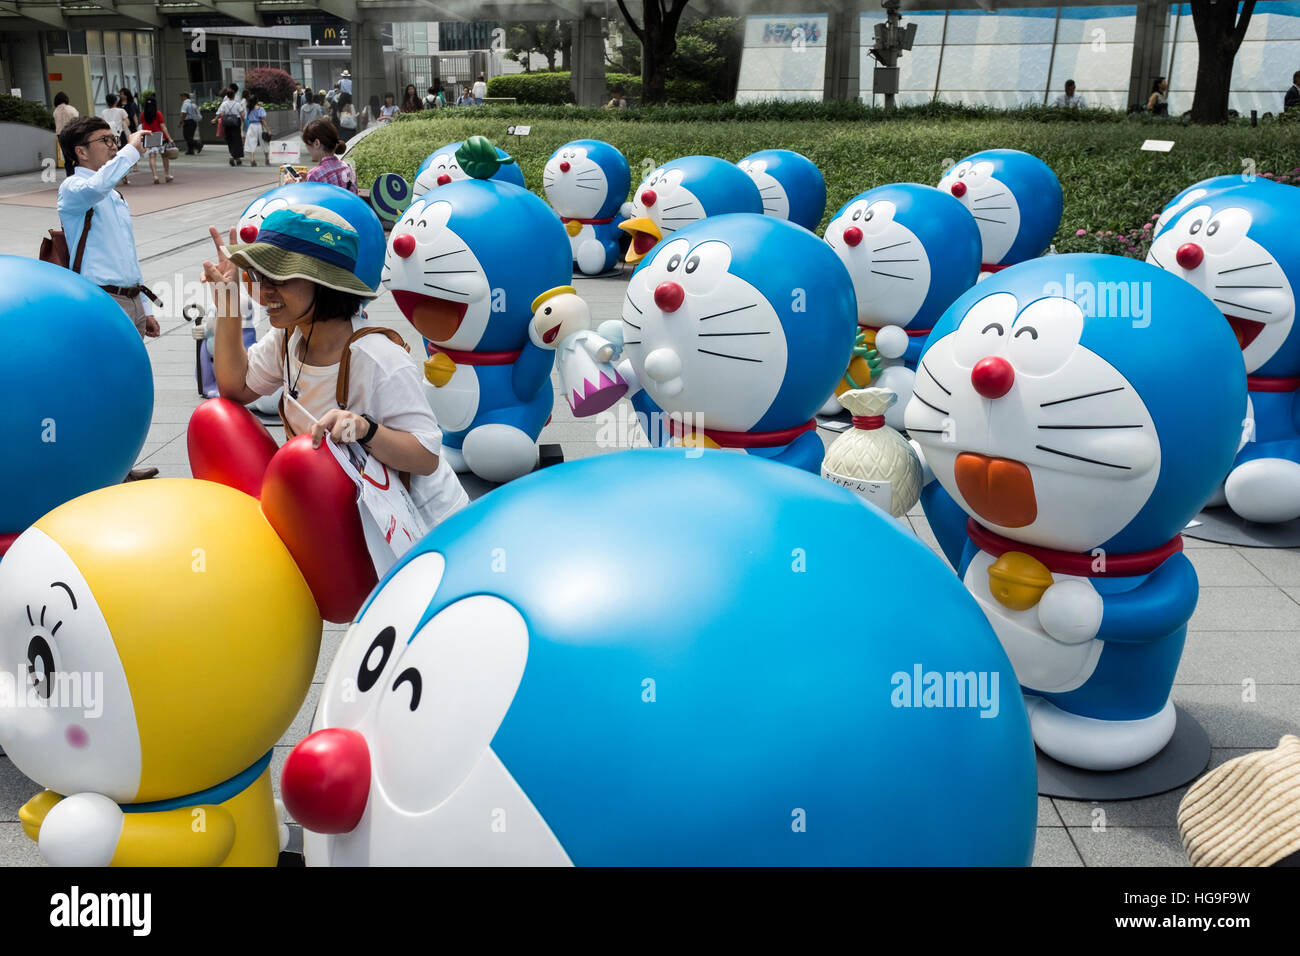 People look at Doraemon character statues at Roppongi Hills in Tokyo, Japan. Stock Photo